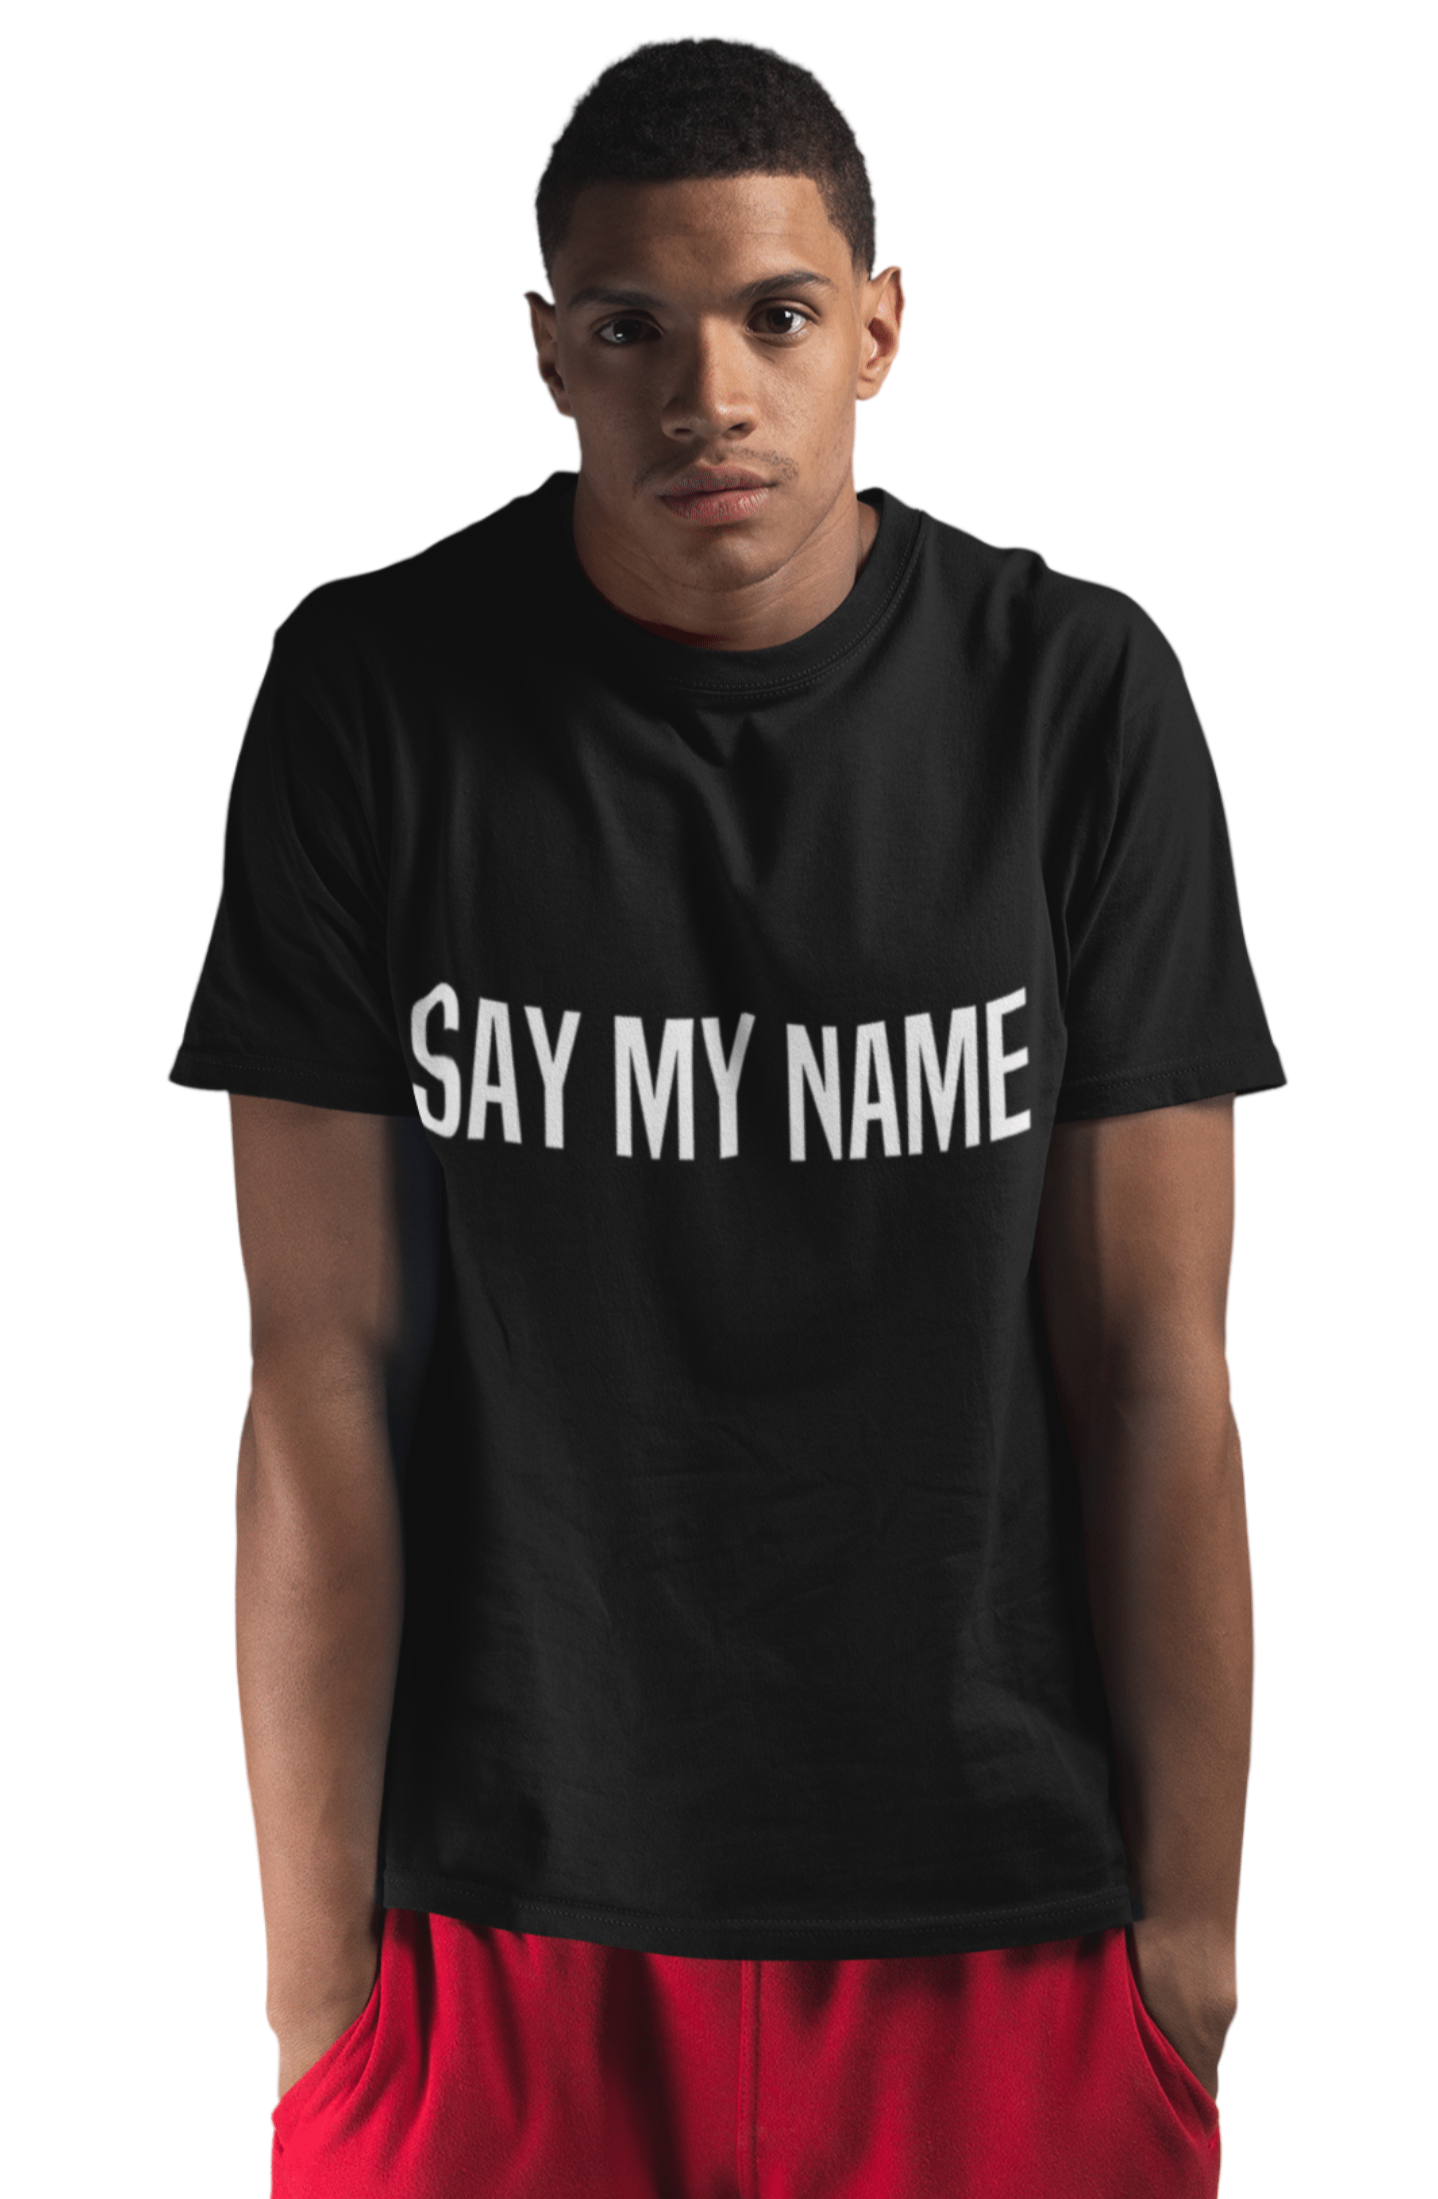 CSG unisex T-SHIRT “SAY MY NAME” wit